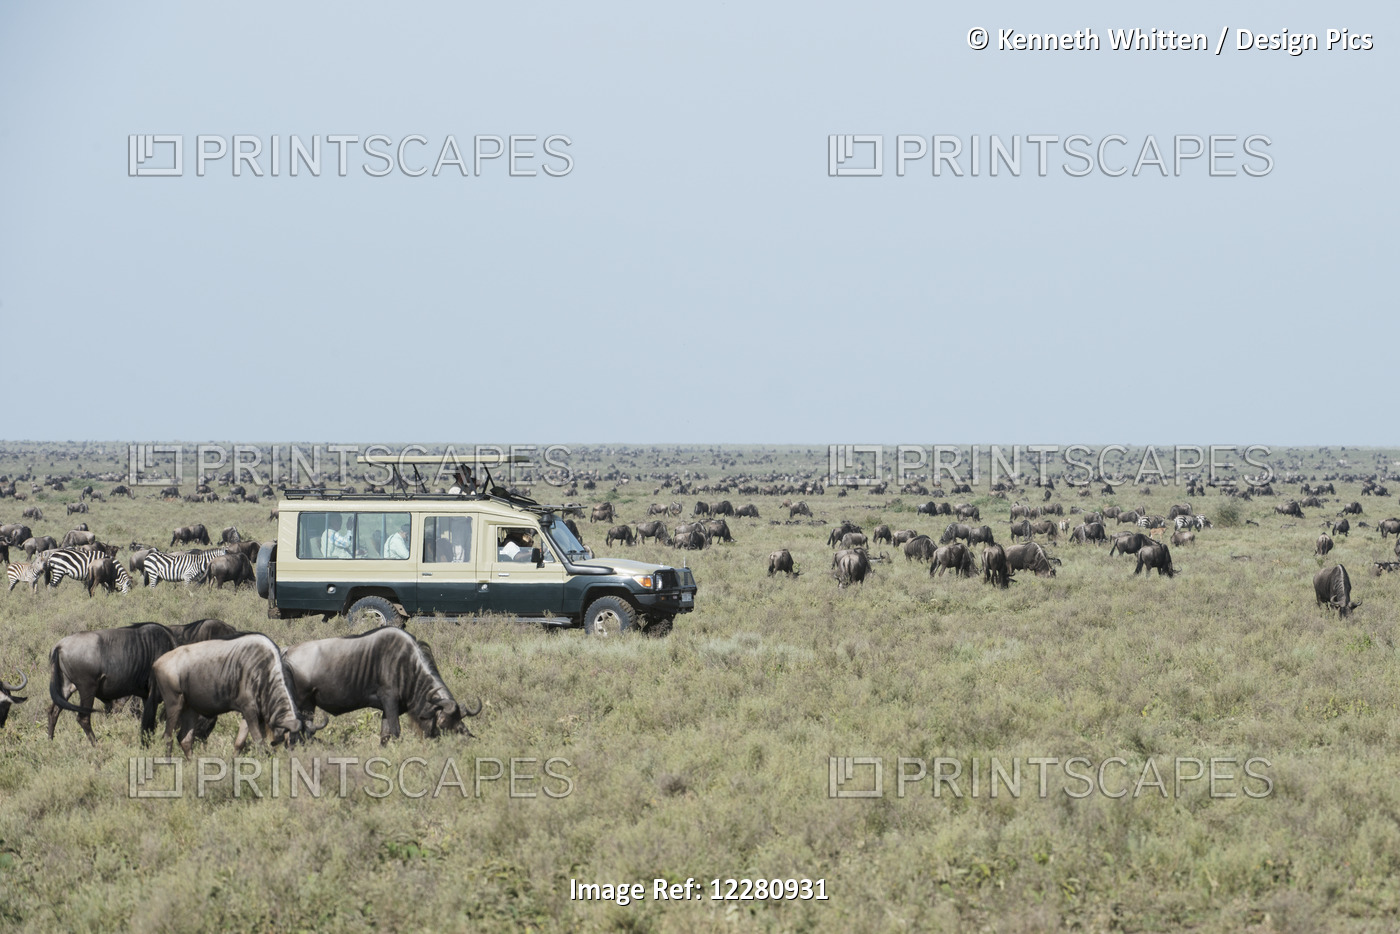 Safari Vehicle Surrounded By Wildebeest And Zebras On The Serengeti Plains; ...